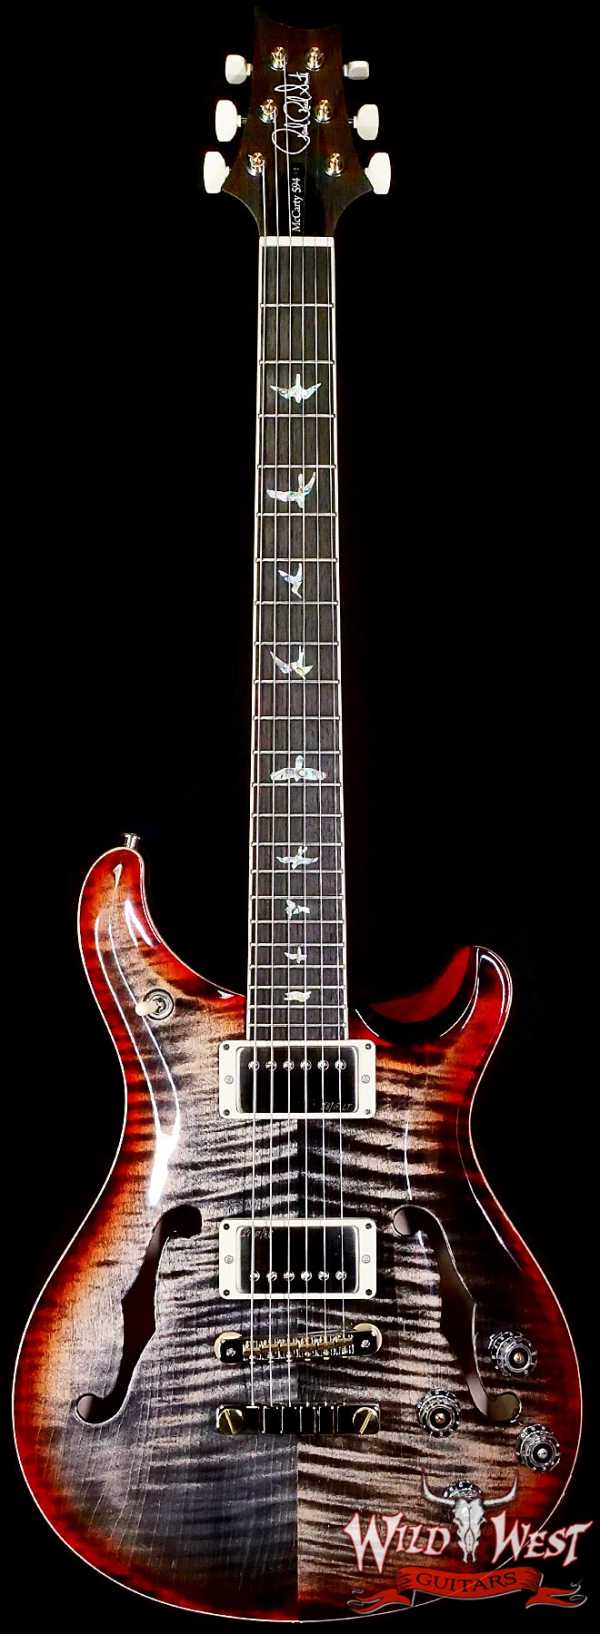 Paul Reed Smith PRS Core Series McCarty 594 Hollowbody II HBII594 Rosewood Fingerboard Charcoal Cherry Burst 5.95 LBS